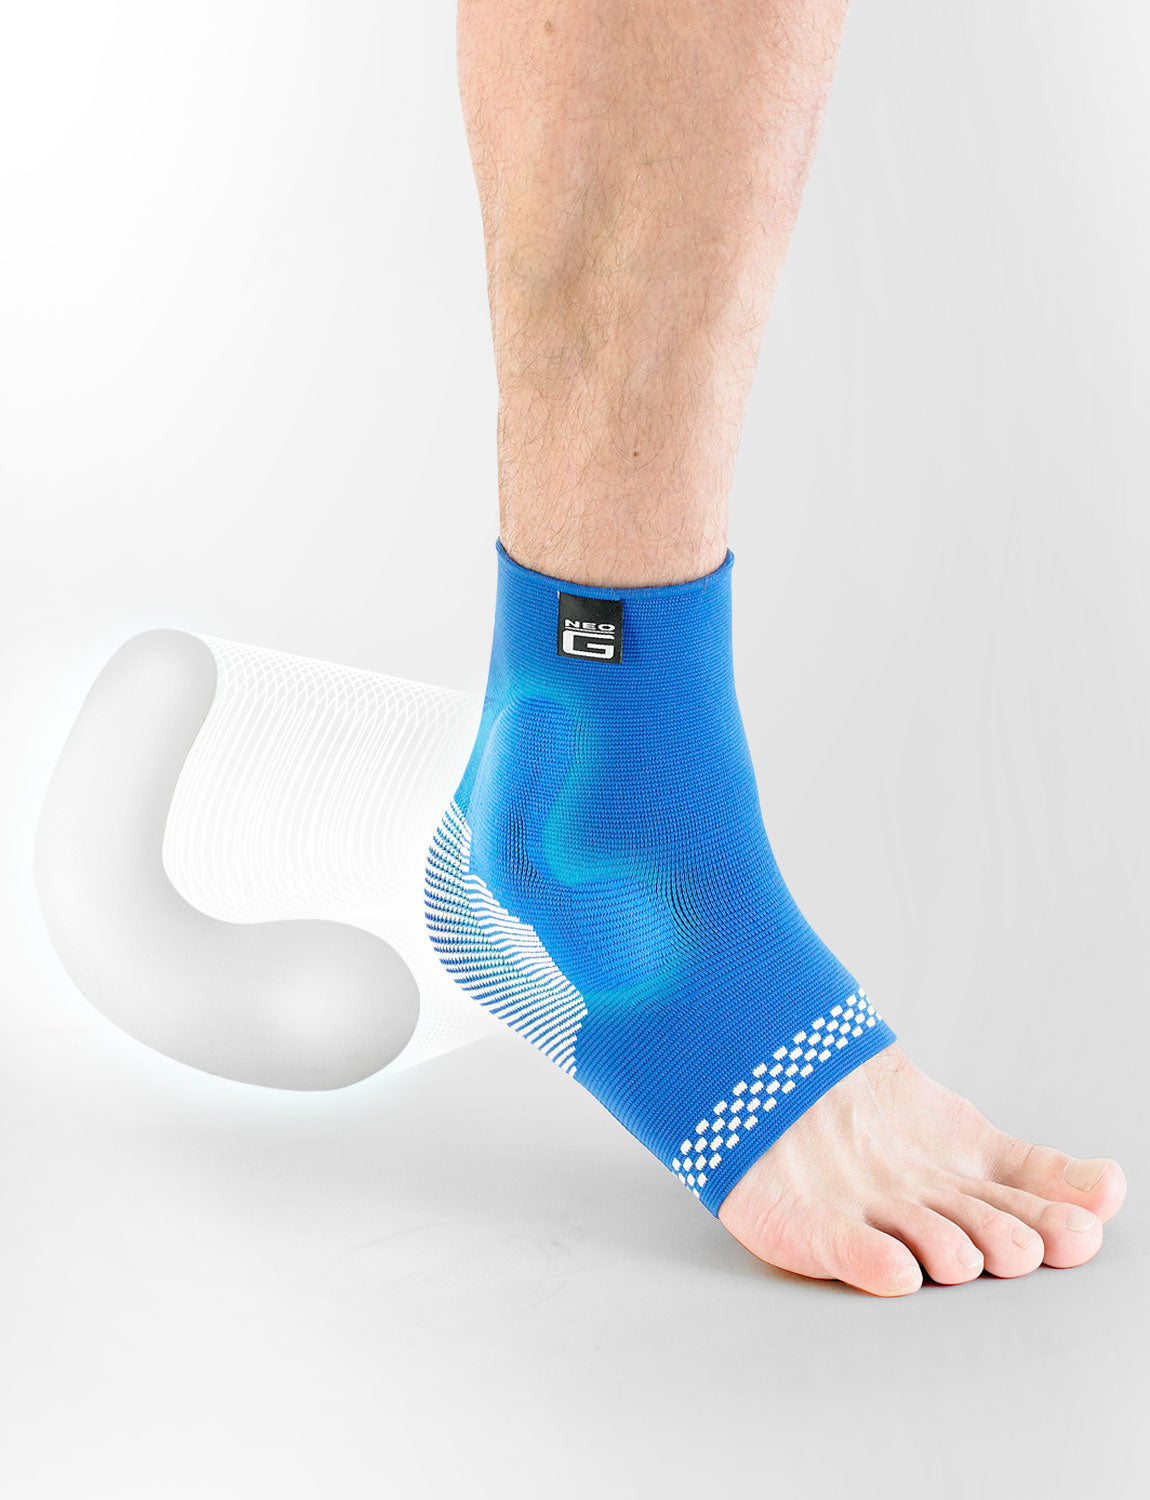 Airflow Plus Ankle Support with Silicone Joint Cushions